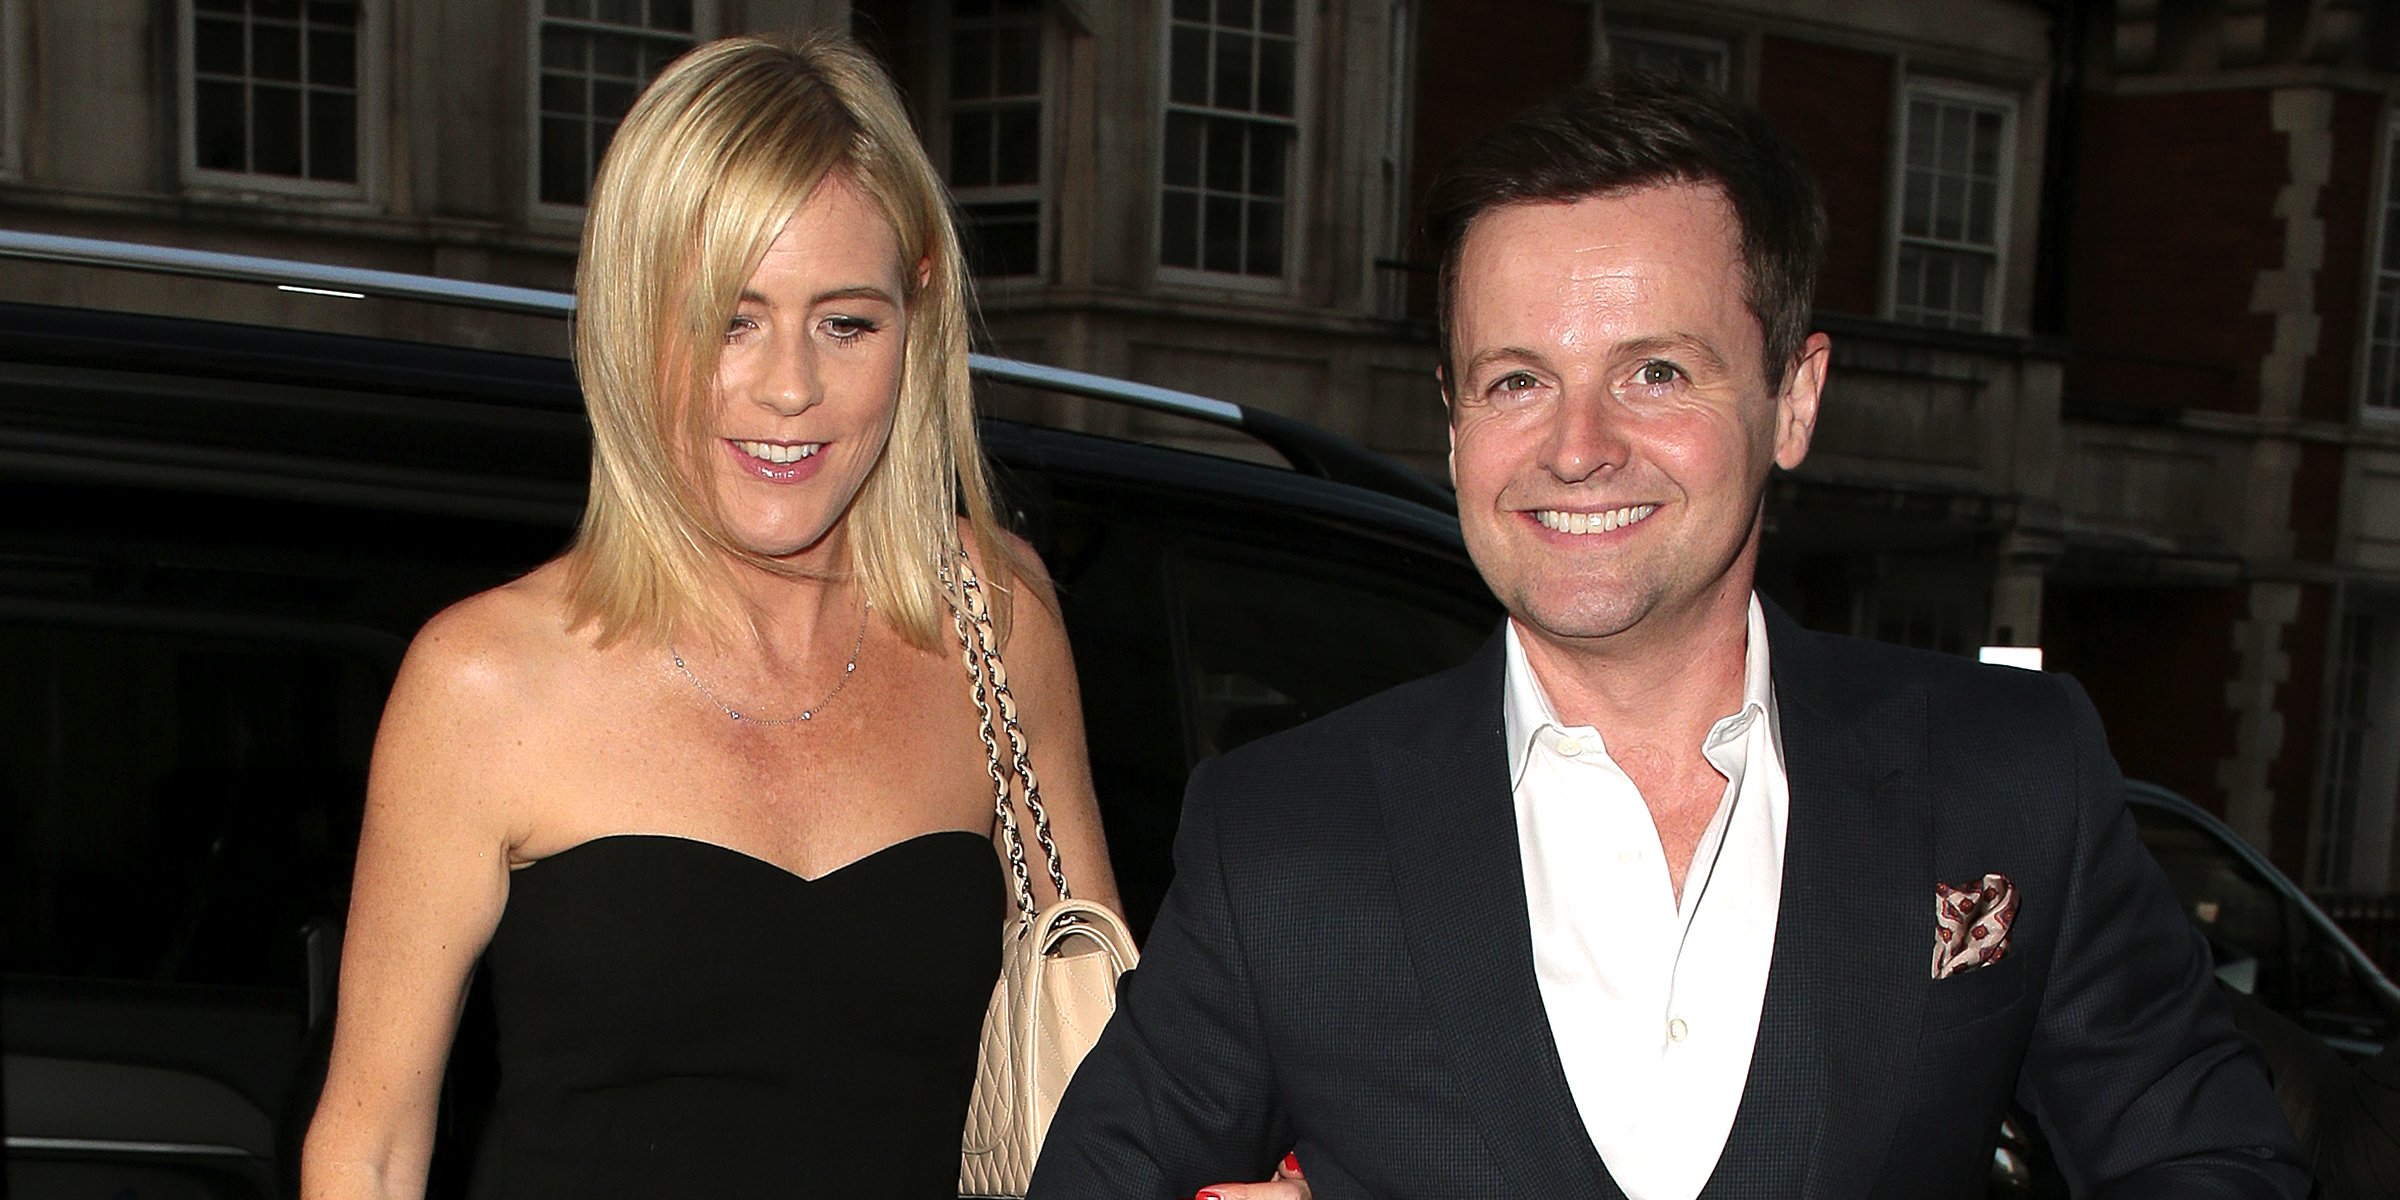 Ali Astall and Declan Donnelly | Source: Getty Images